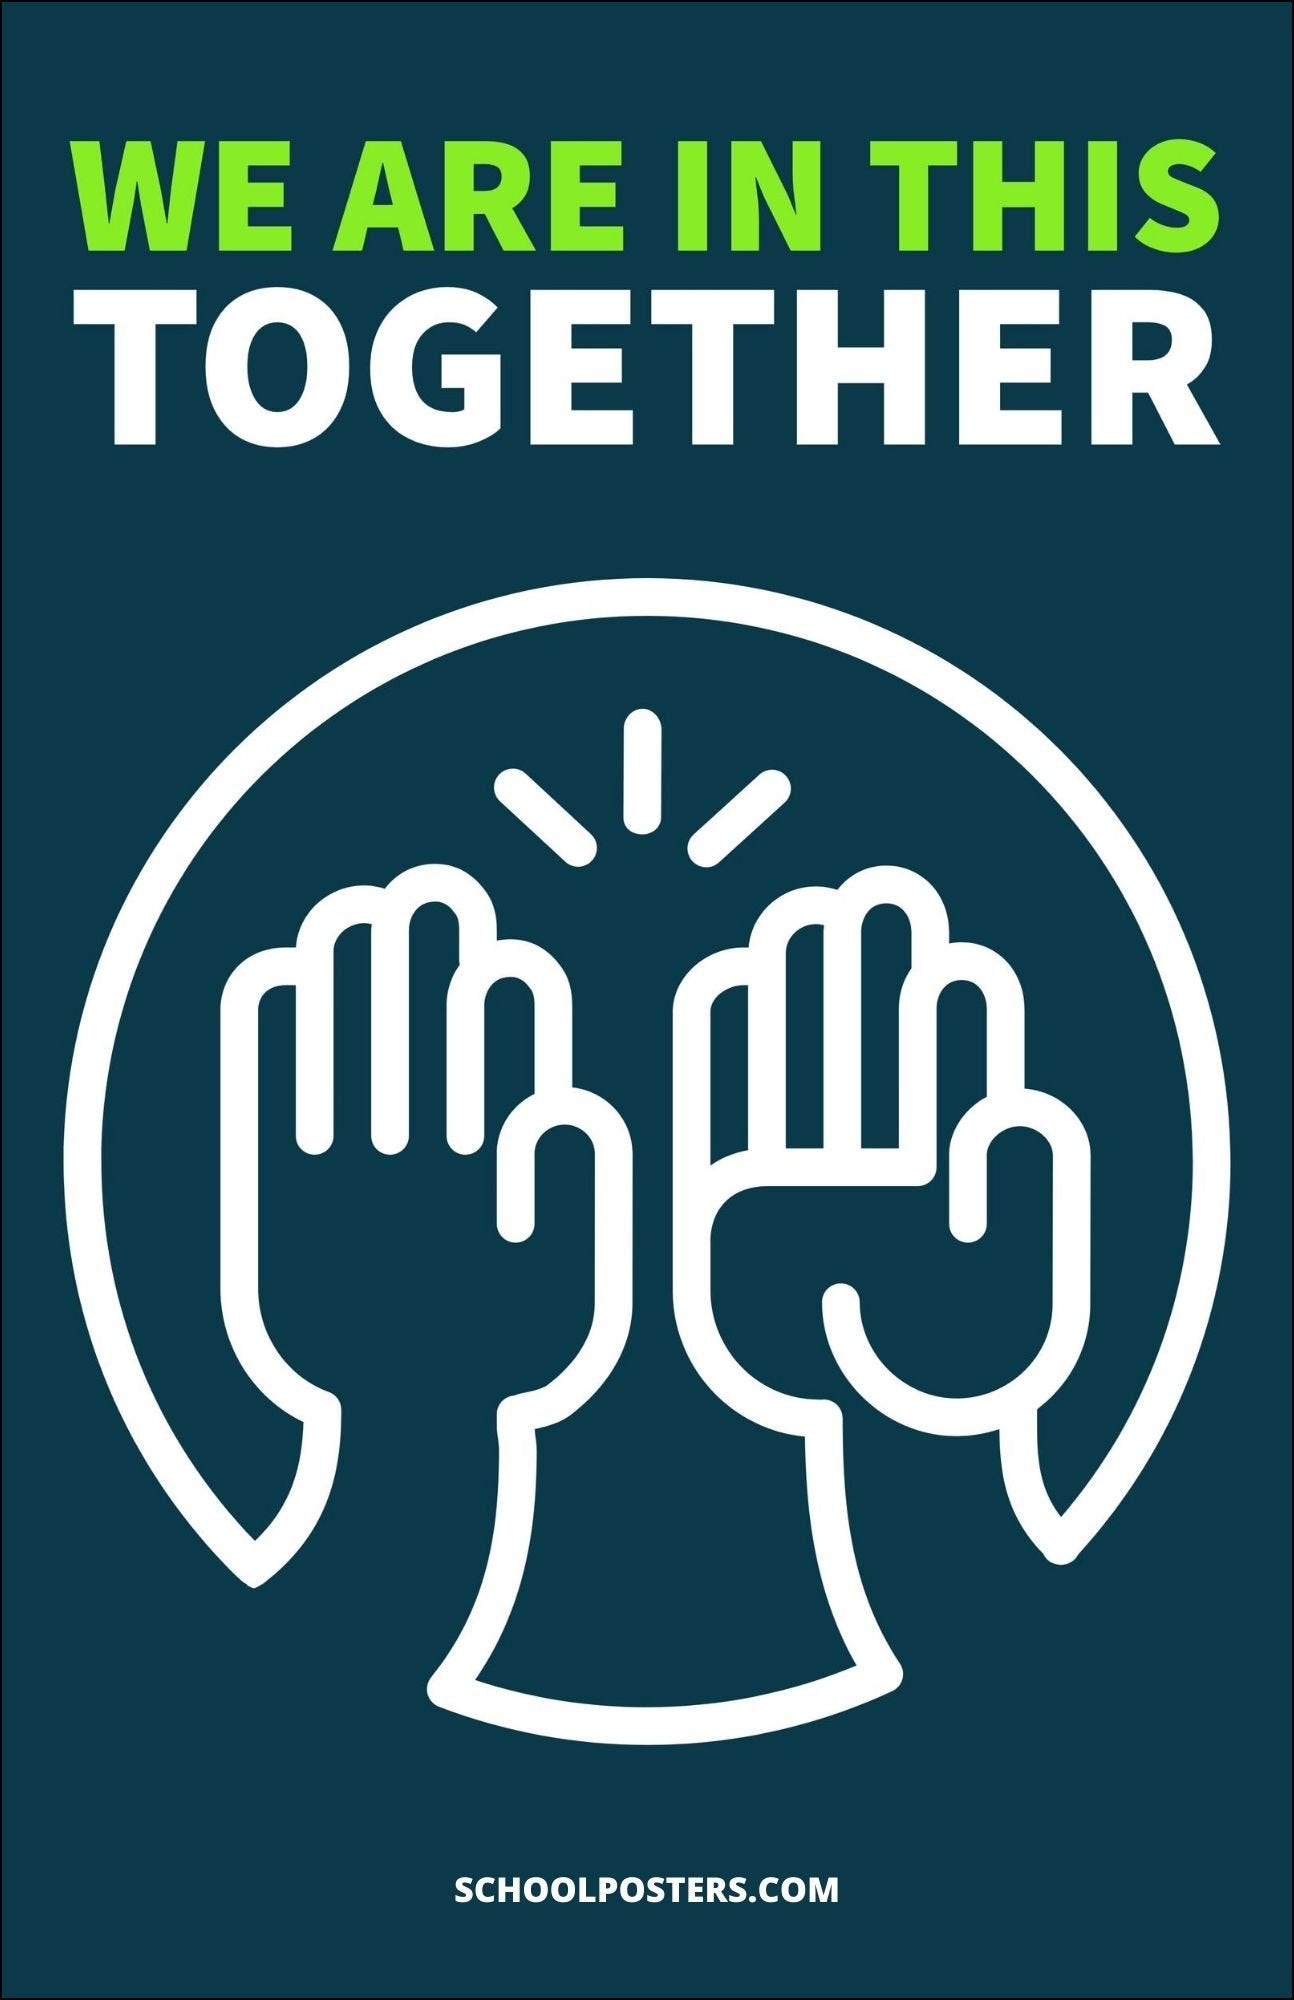 We Are In This Together Poster